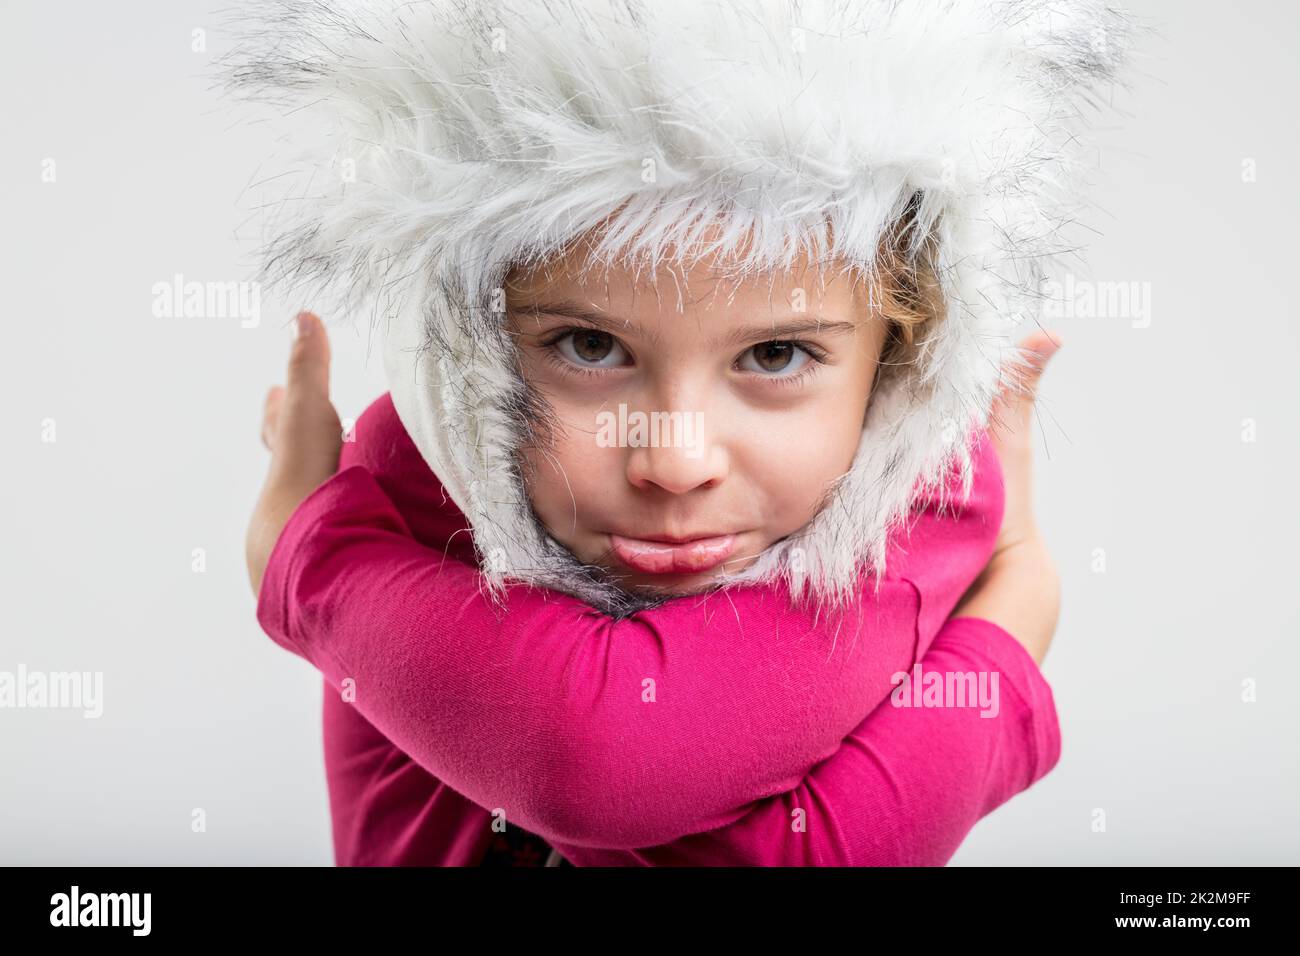 Young schoolgirl wearing fluffy cap making face Stock Photo